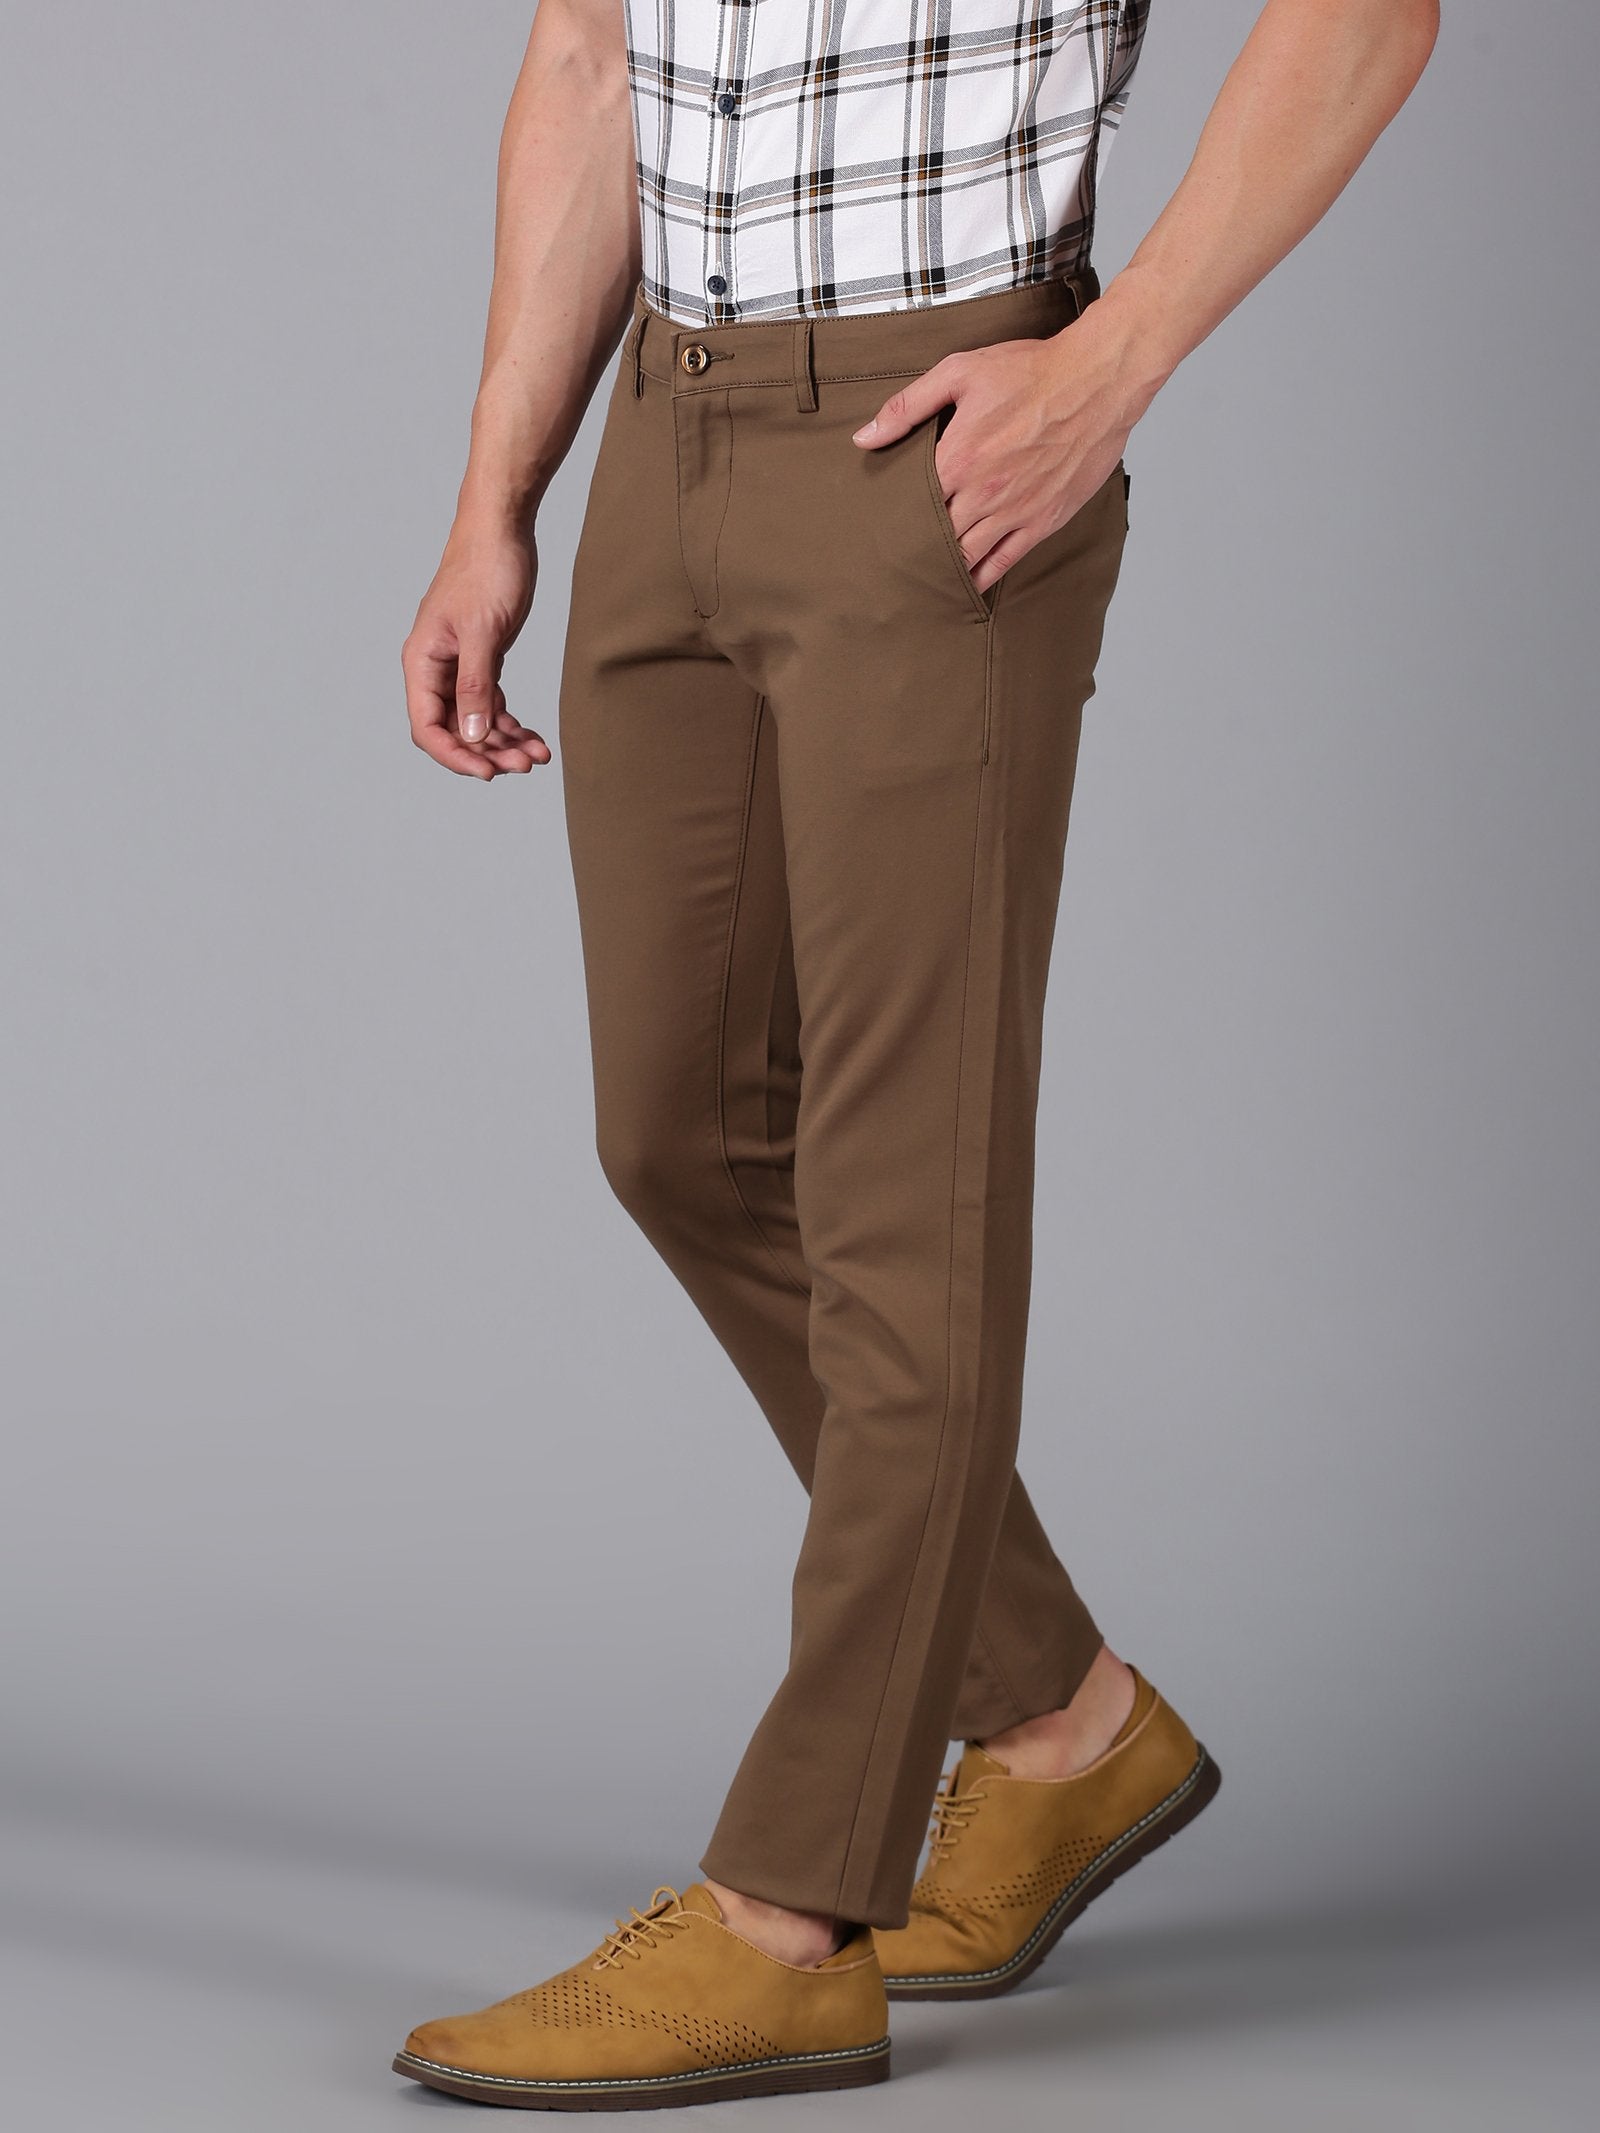 Trousers for Men | Formal, Casual, Joggers, Chinos & More